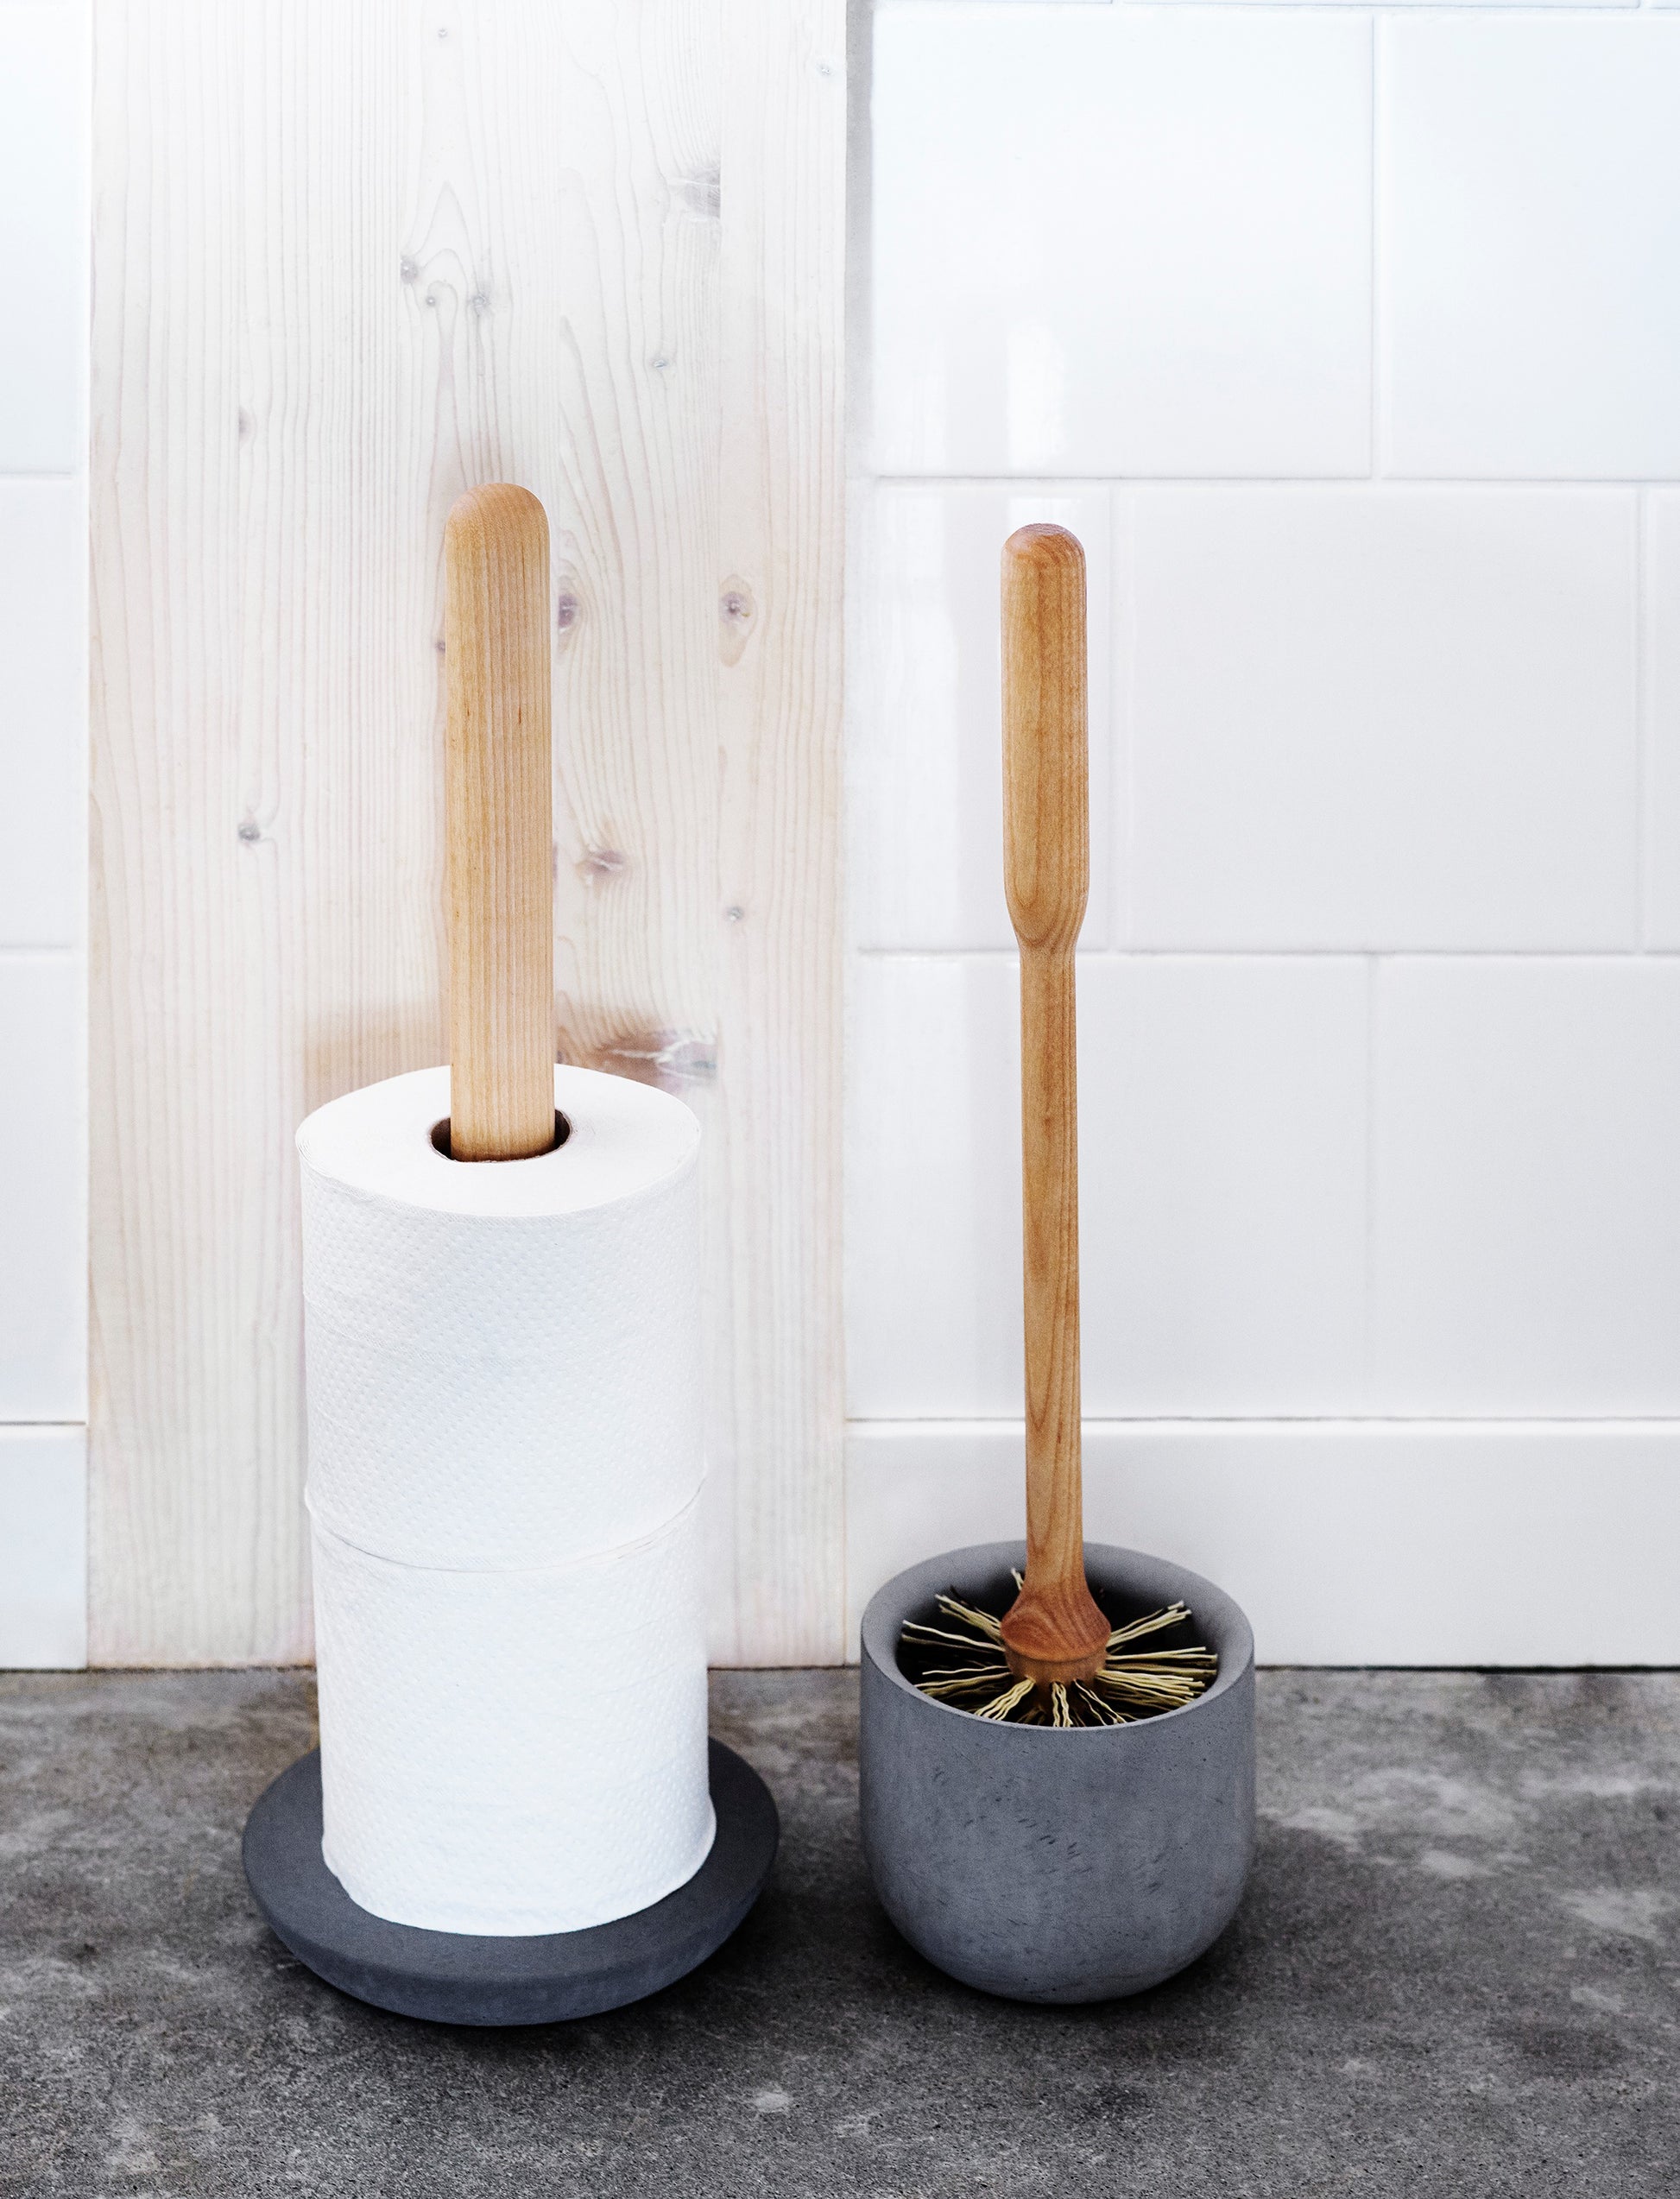 toilet paper holder and toilet brush made of wood and concrete